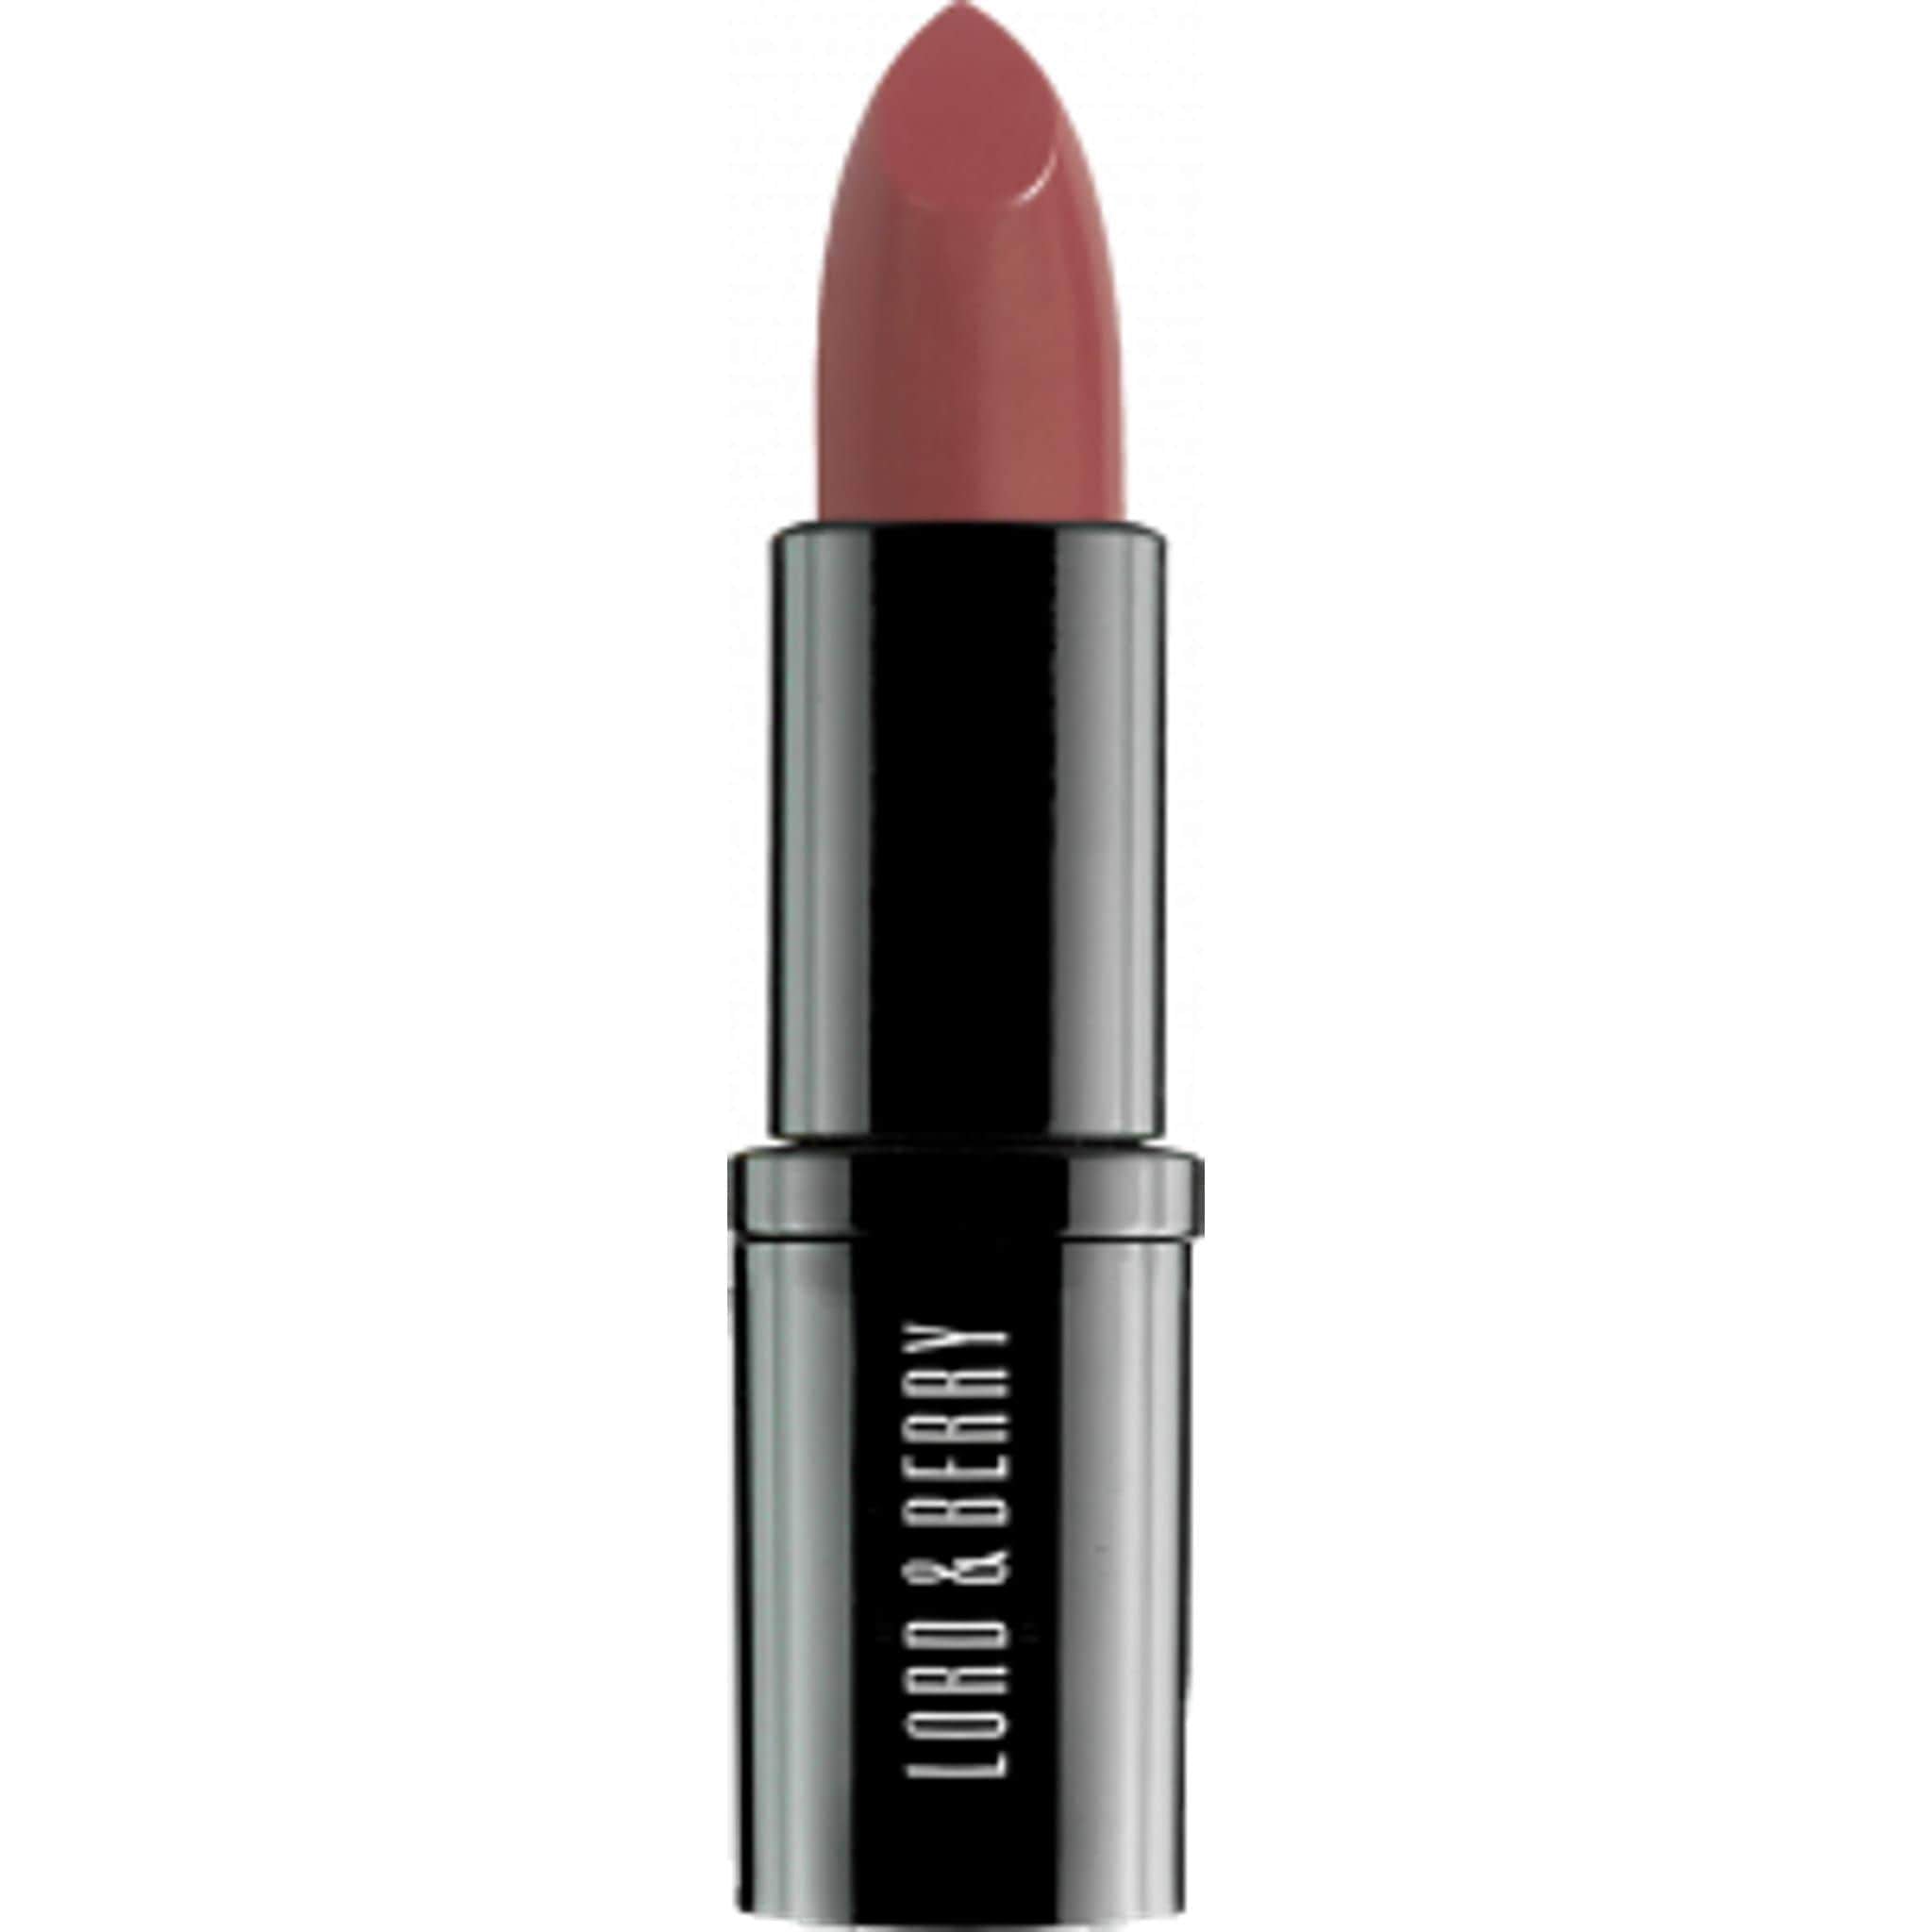 LORD & BERRY Absolute - Pale Mauve #7431, Lipstick, London Loves Beauty